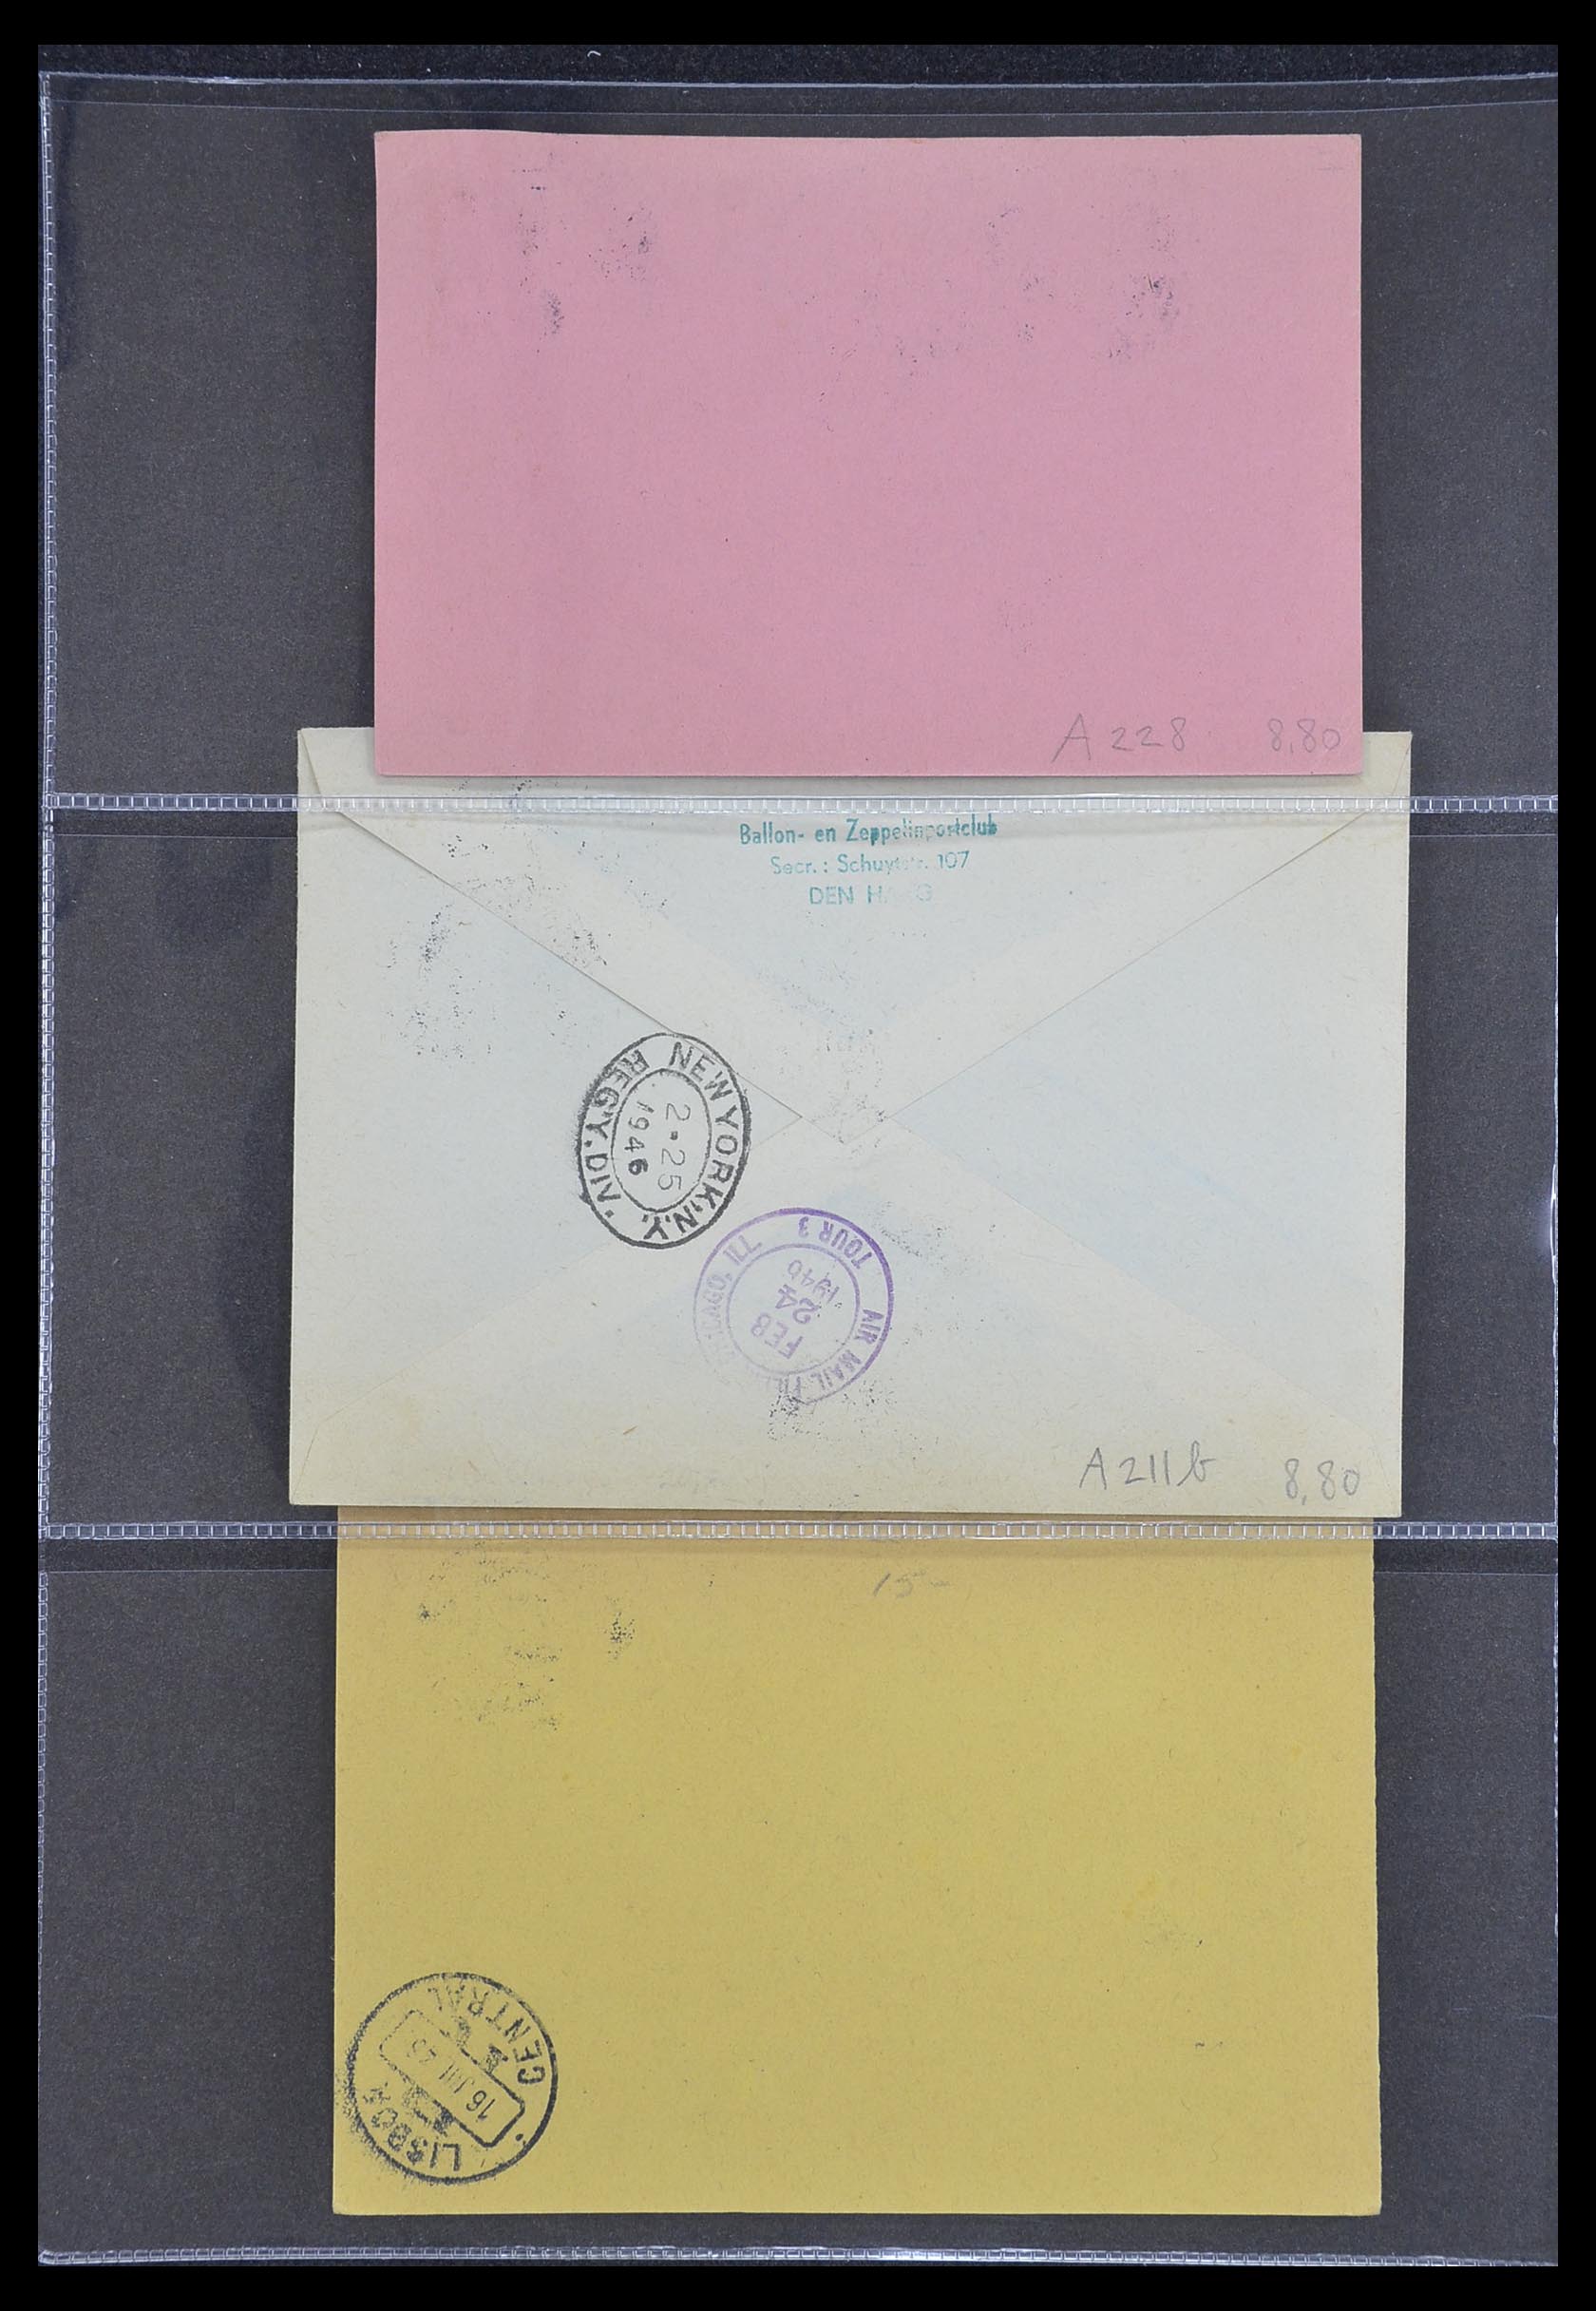 33330 172 - Stamp collection 33330 Netherlands covers 1852-1959.